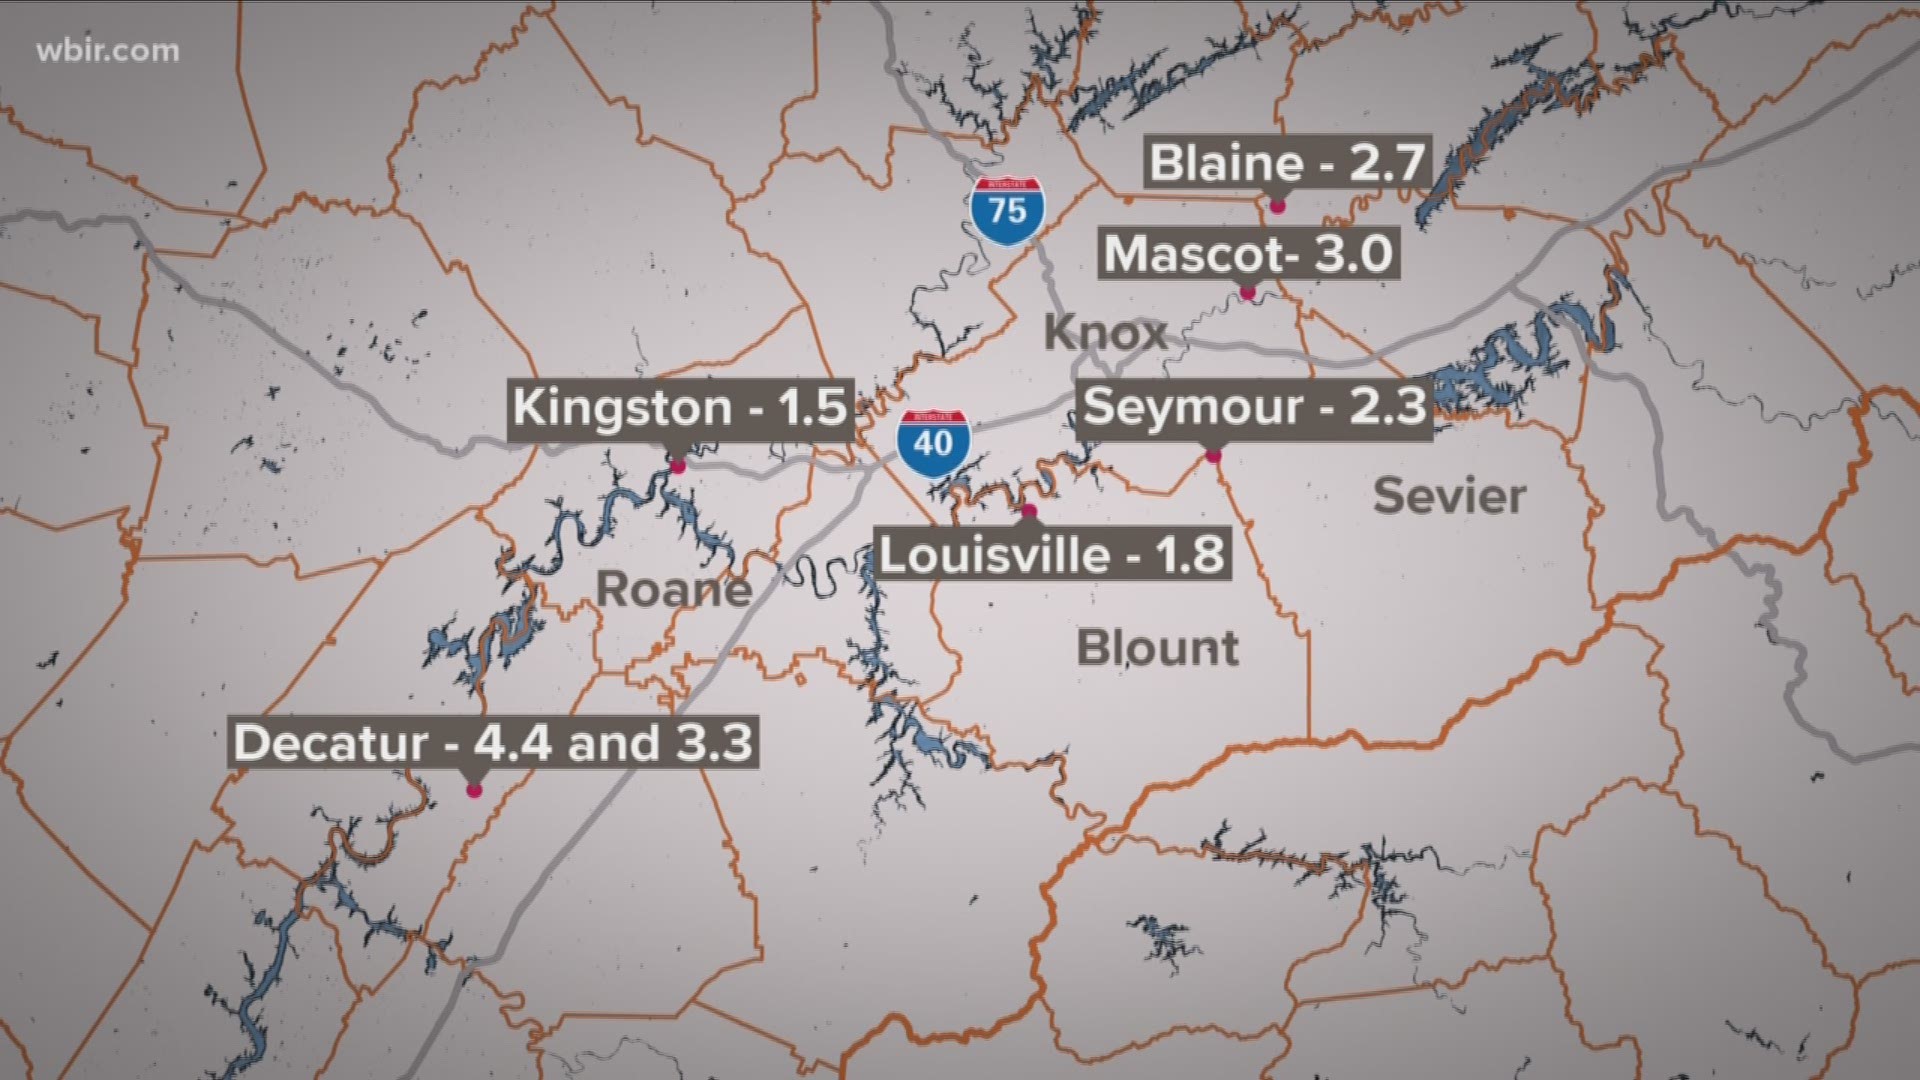 In little more than a week, there have been more than a dozen earthquakes in East Tennessee.